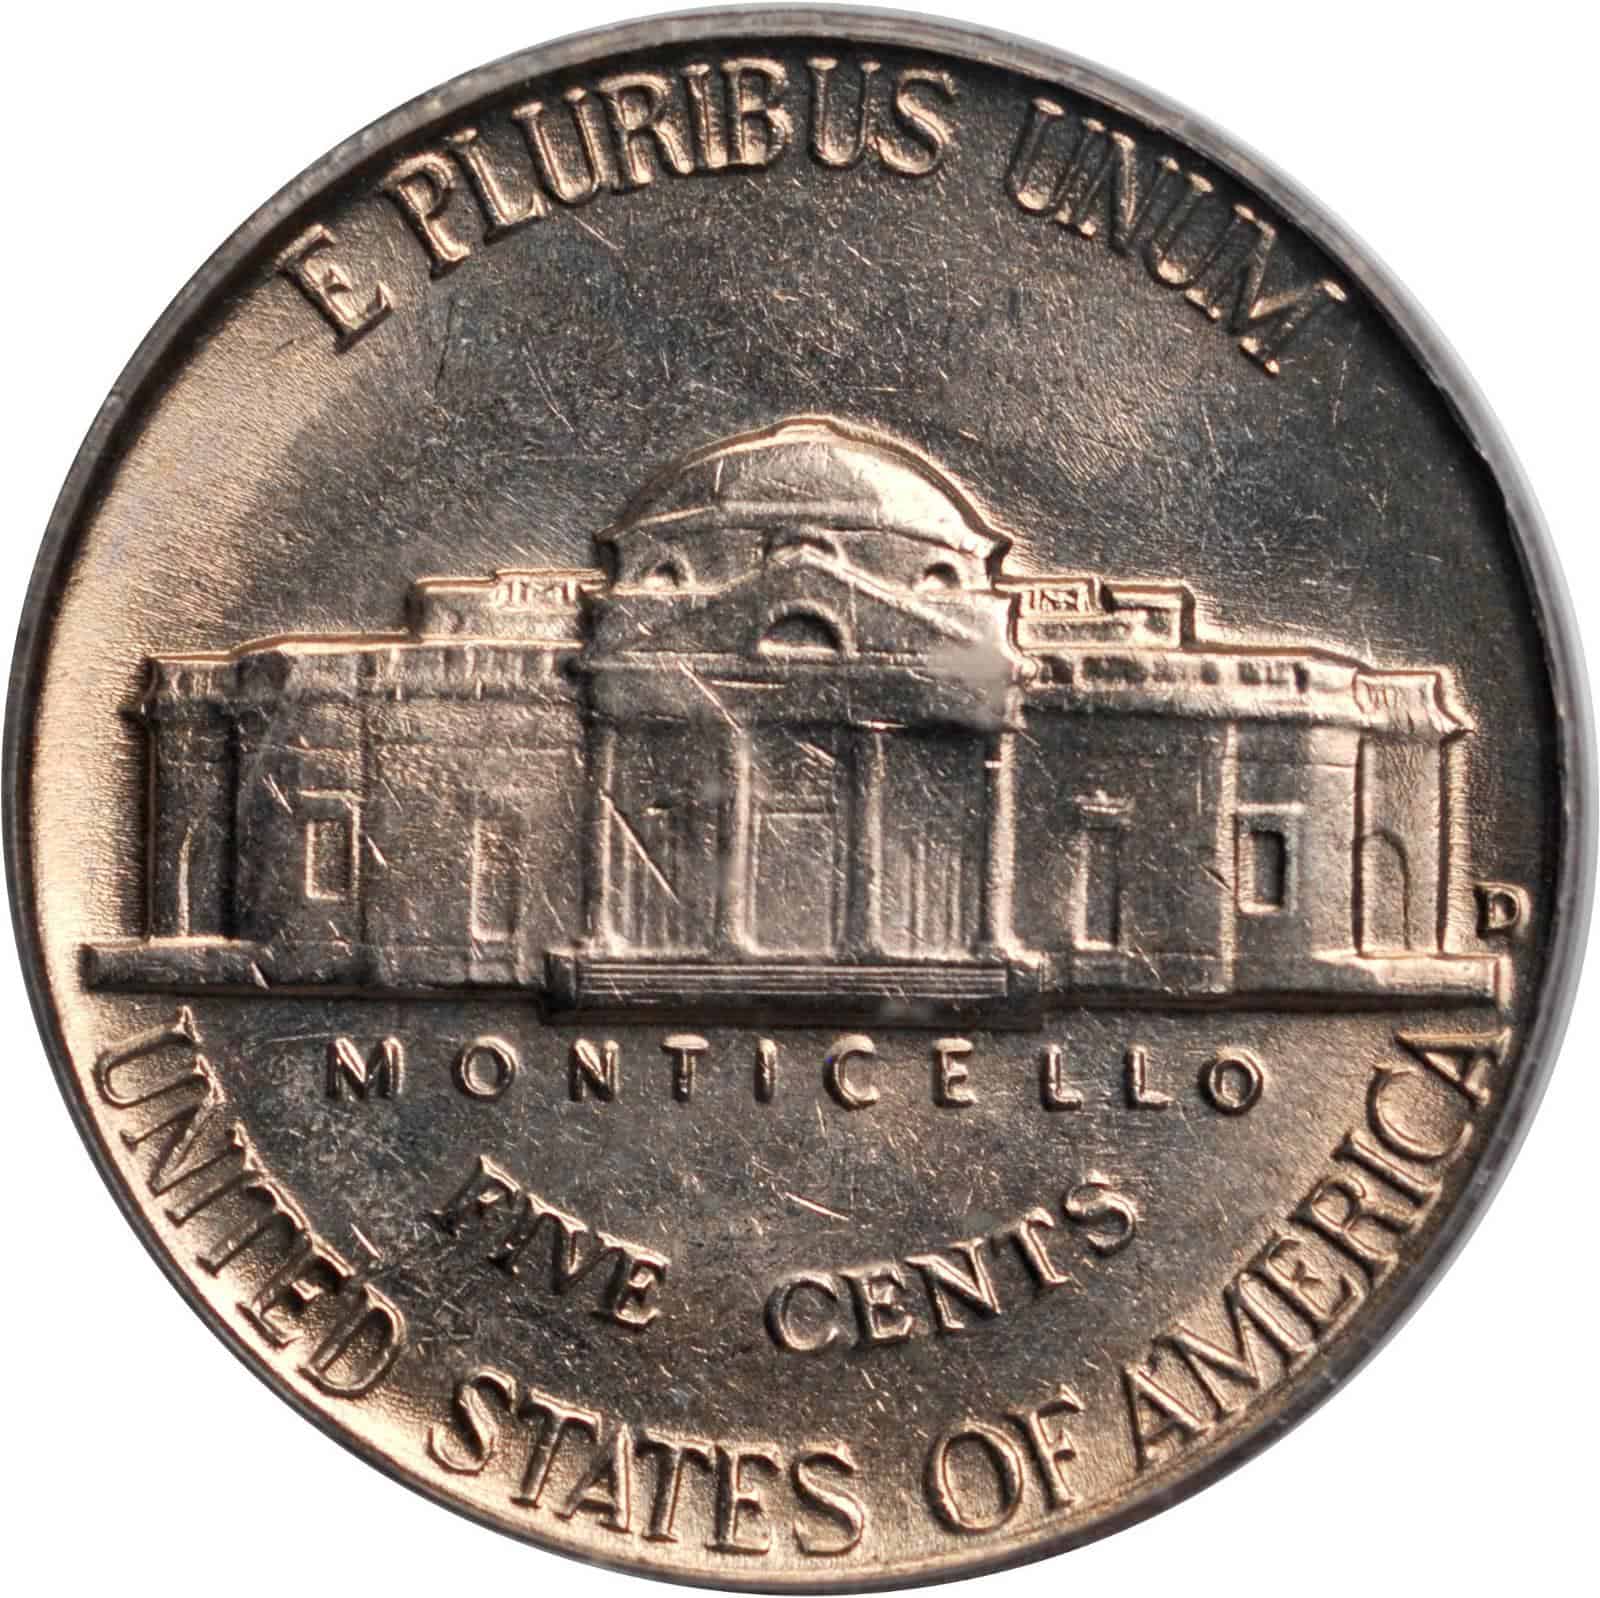 The reverse of the 1954 Jefferson nickel